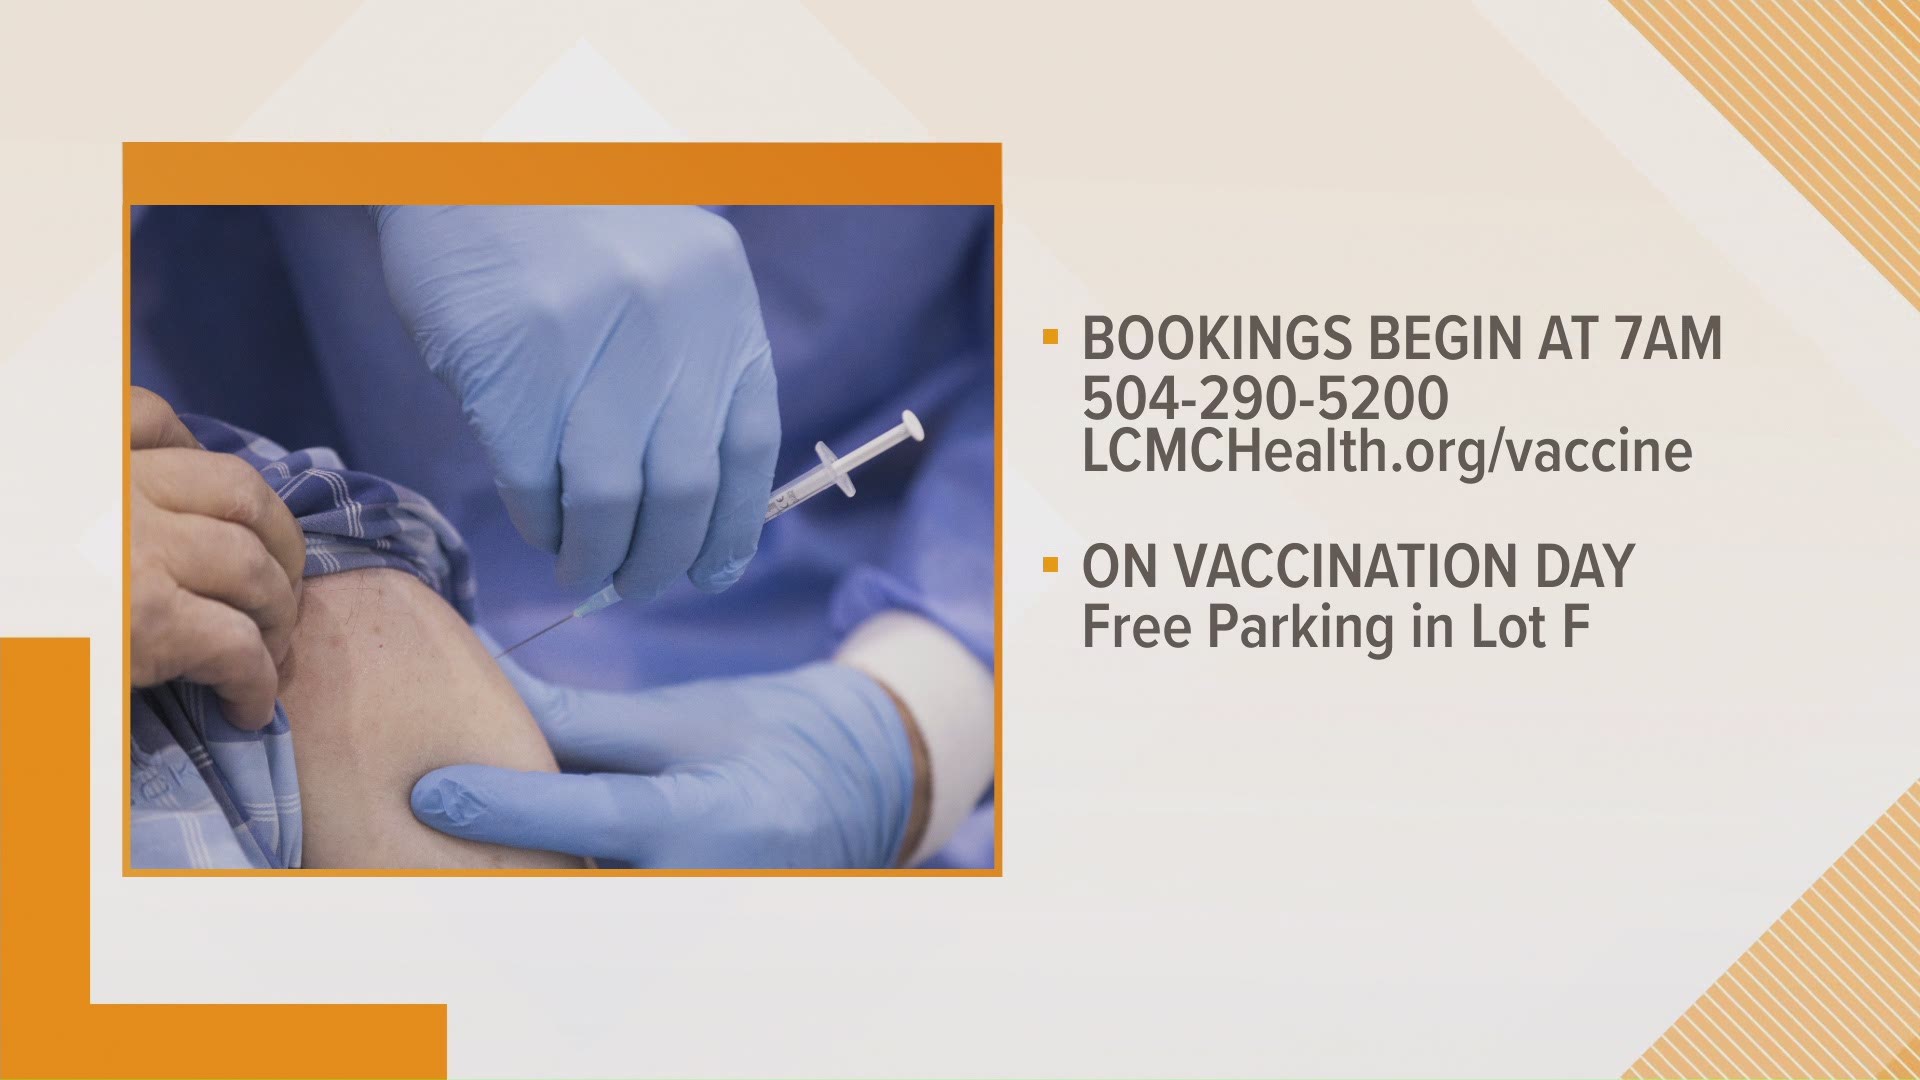 After 7 a.m. Wednesday, you can call 504.290.5200 or visit LCMCHealth.com/vaccine to book an appointment and get the COVID vaccine